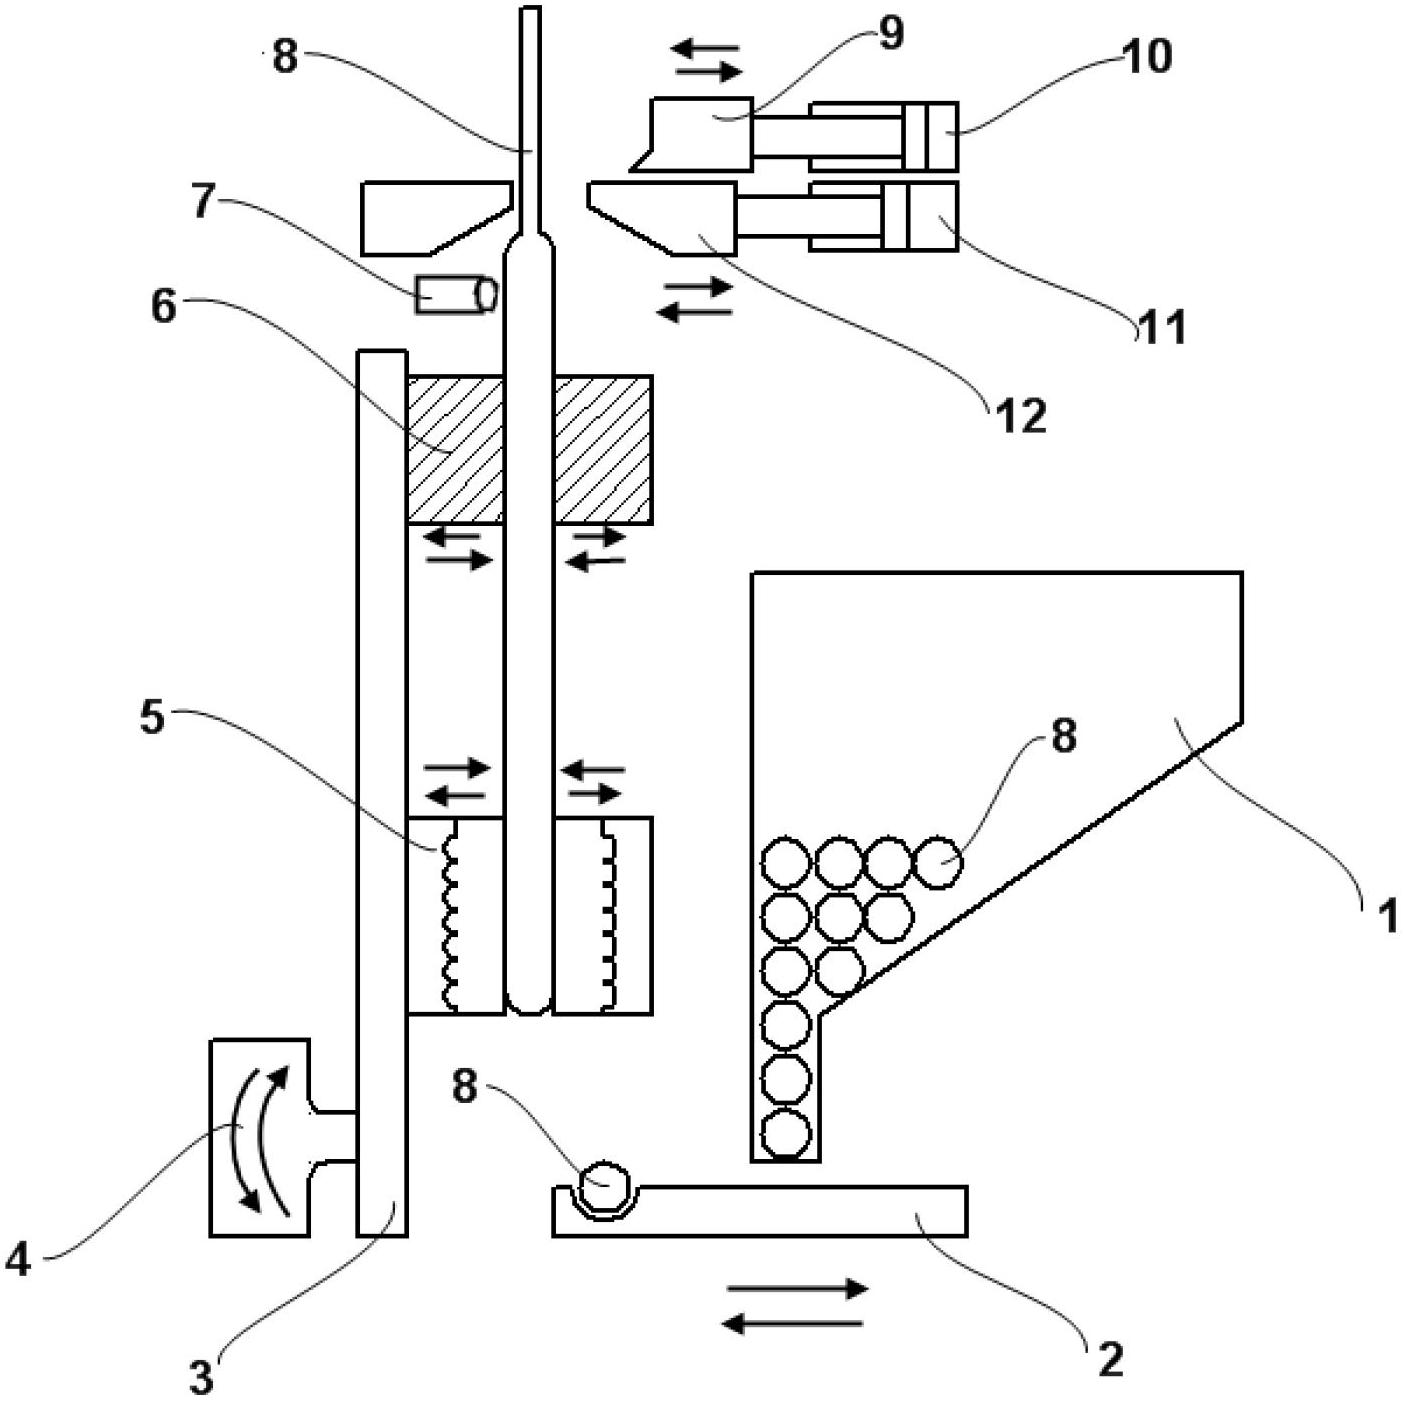 Full automatic heat pipe degassing and sealing device